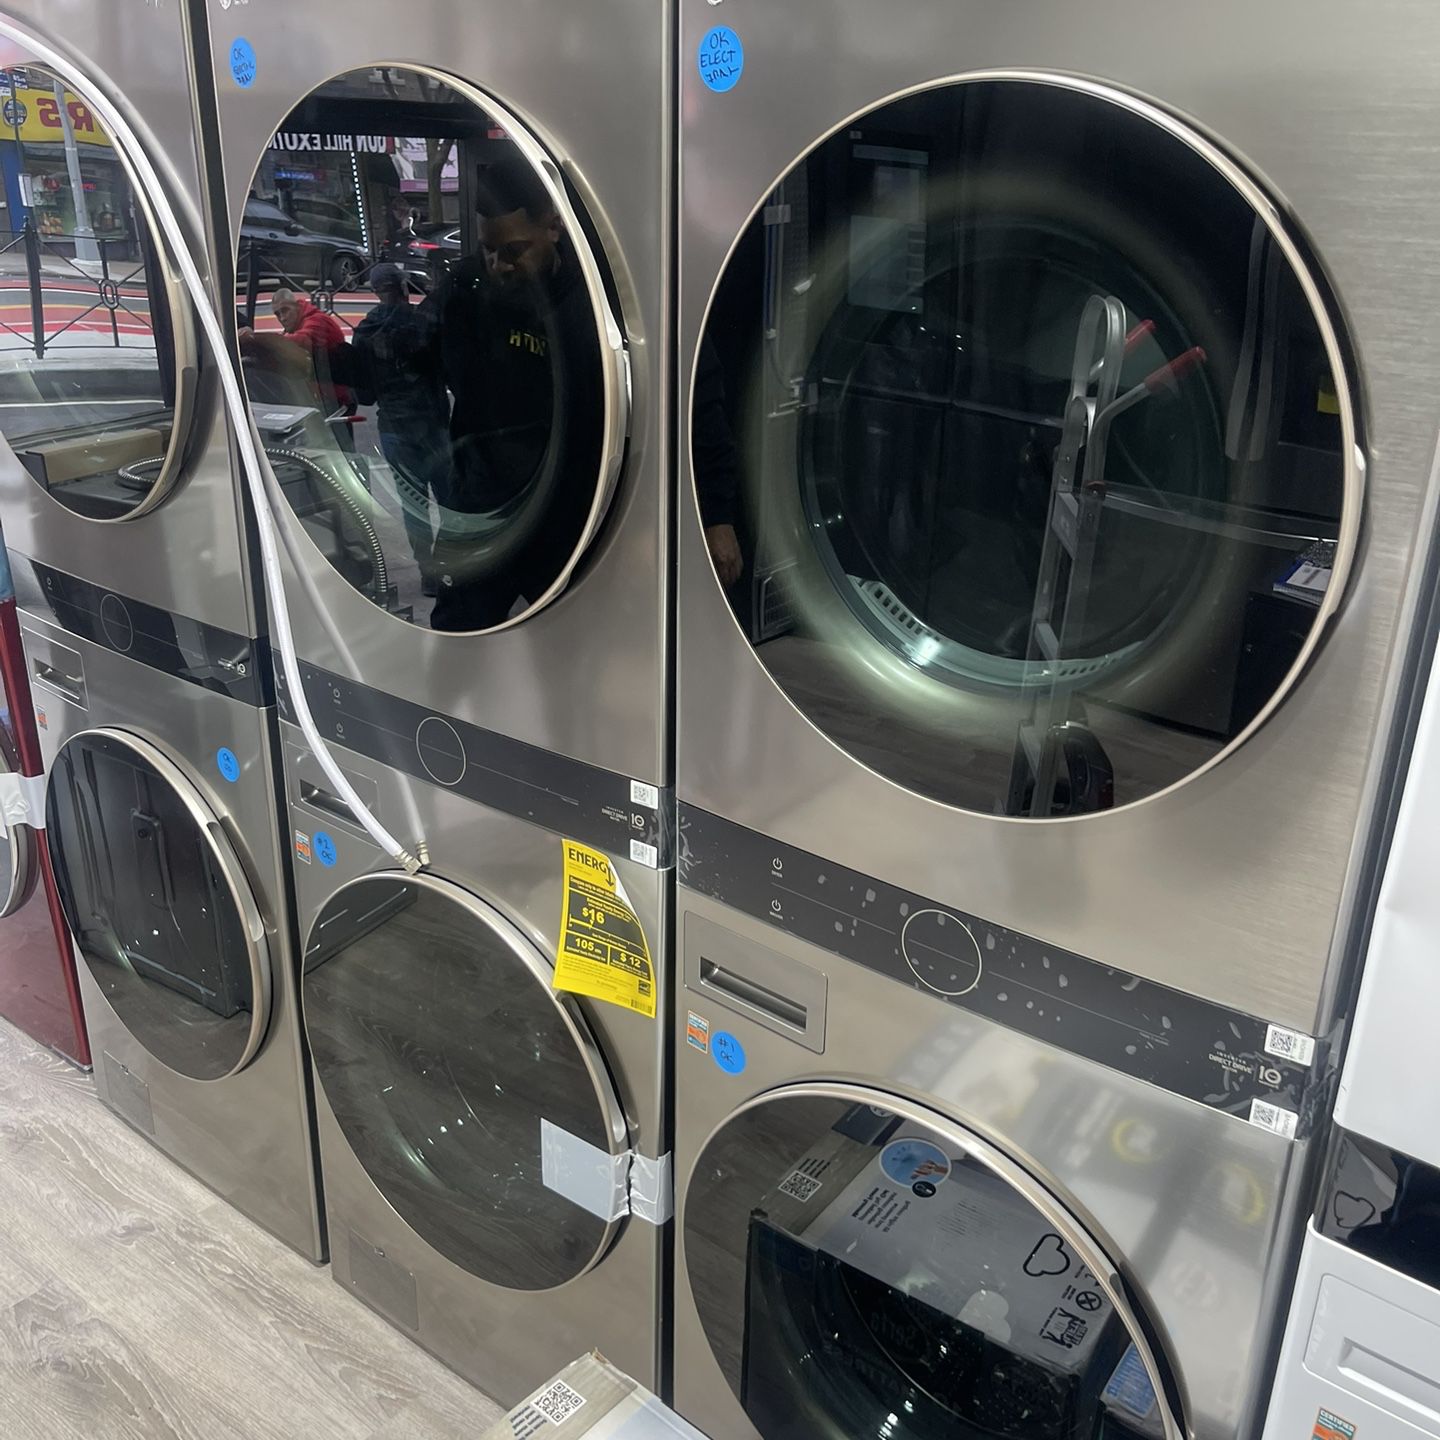 LG Washer Dryer Tower 